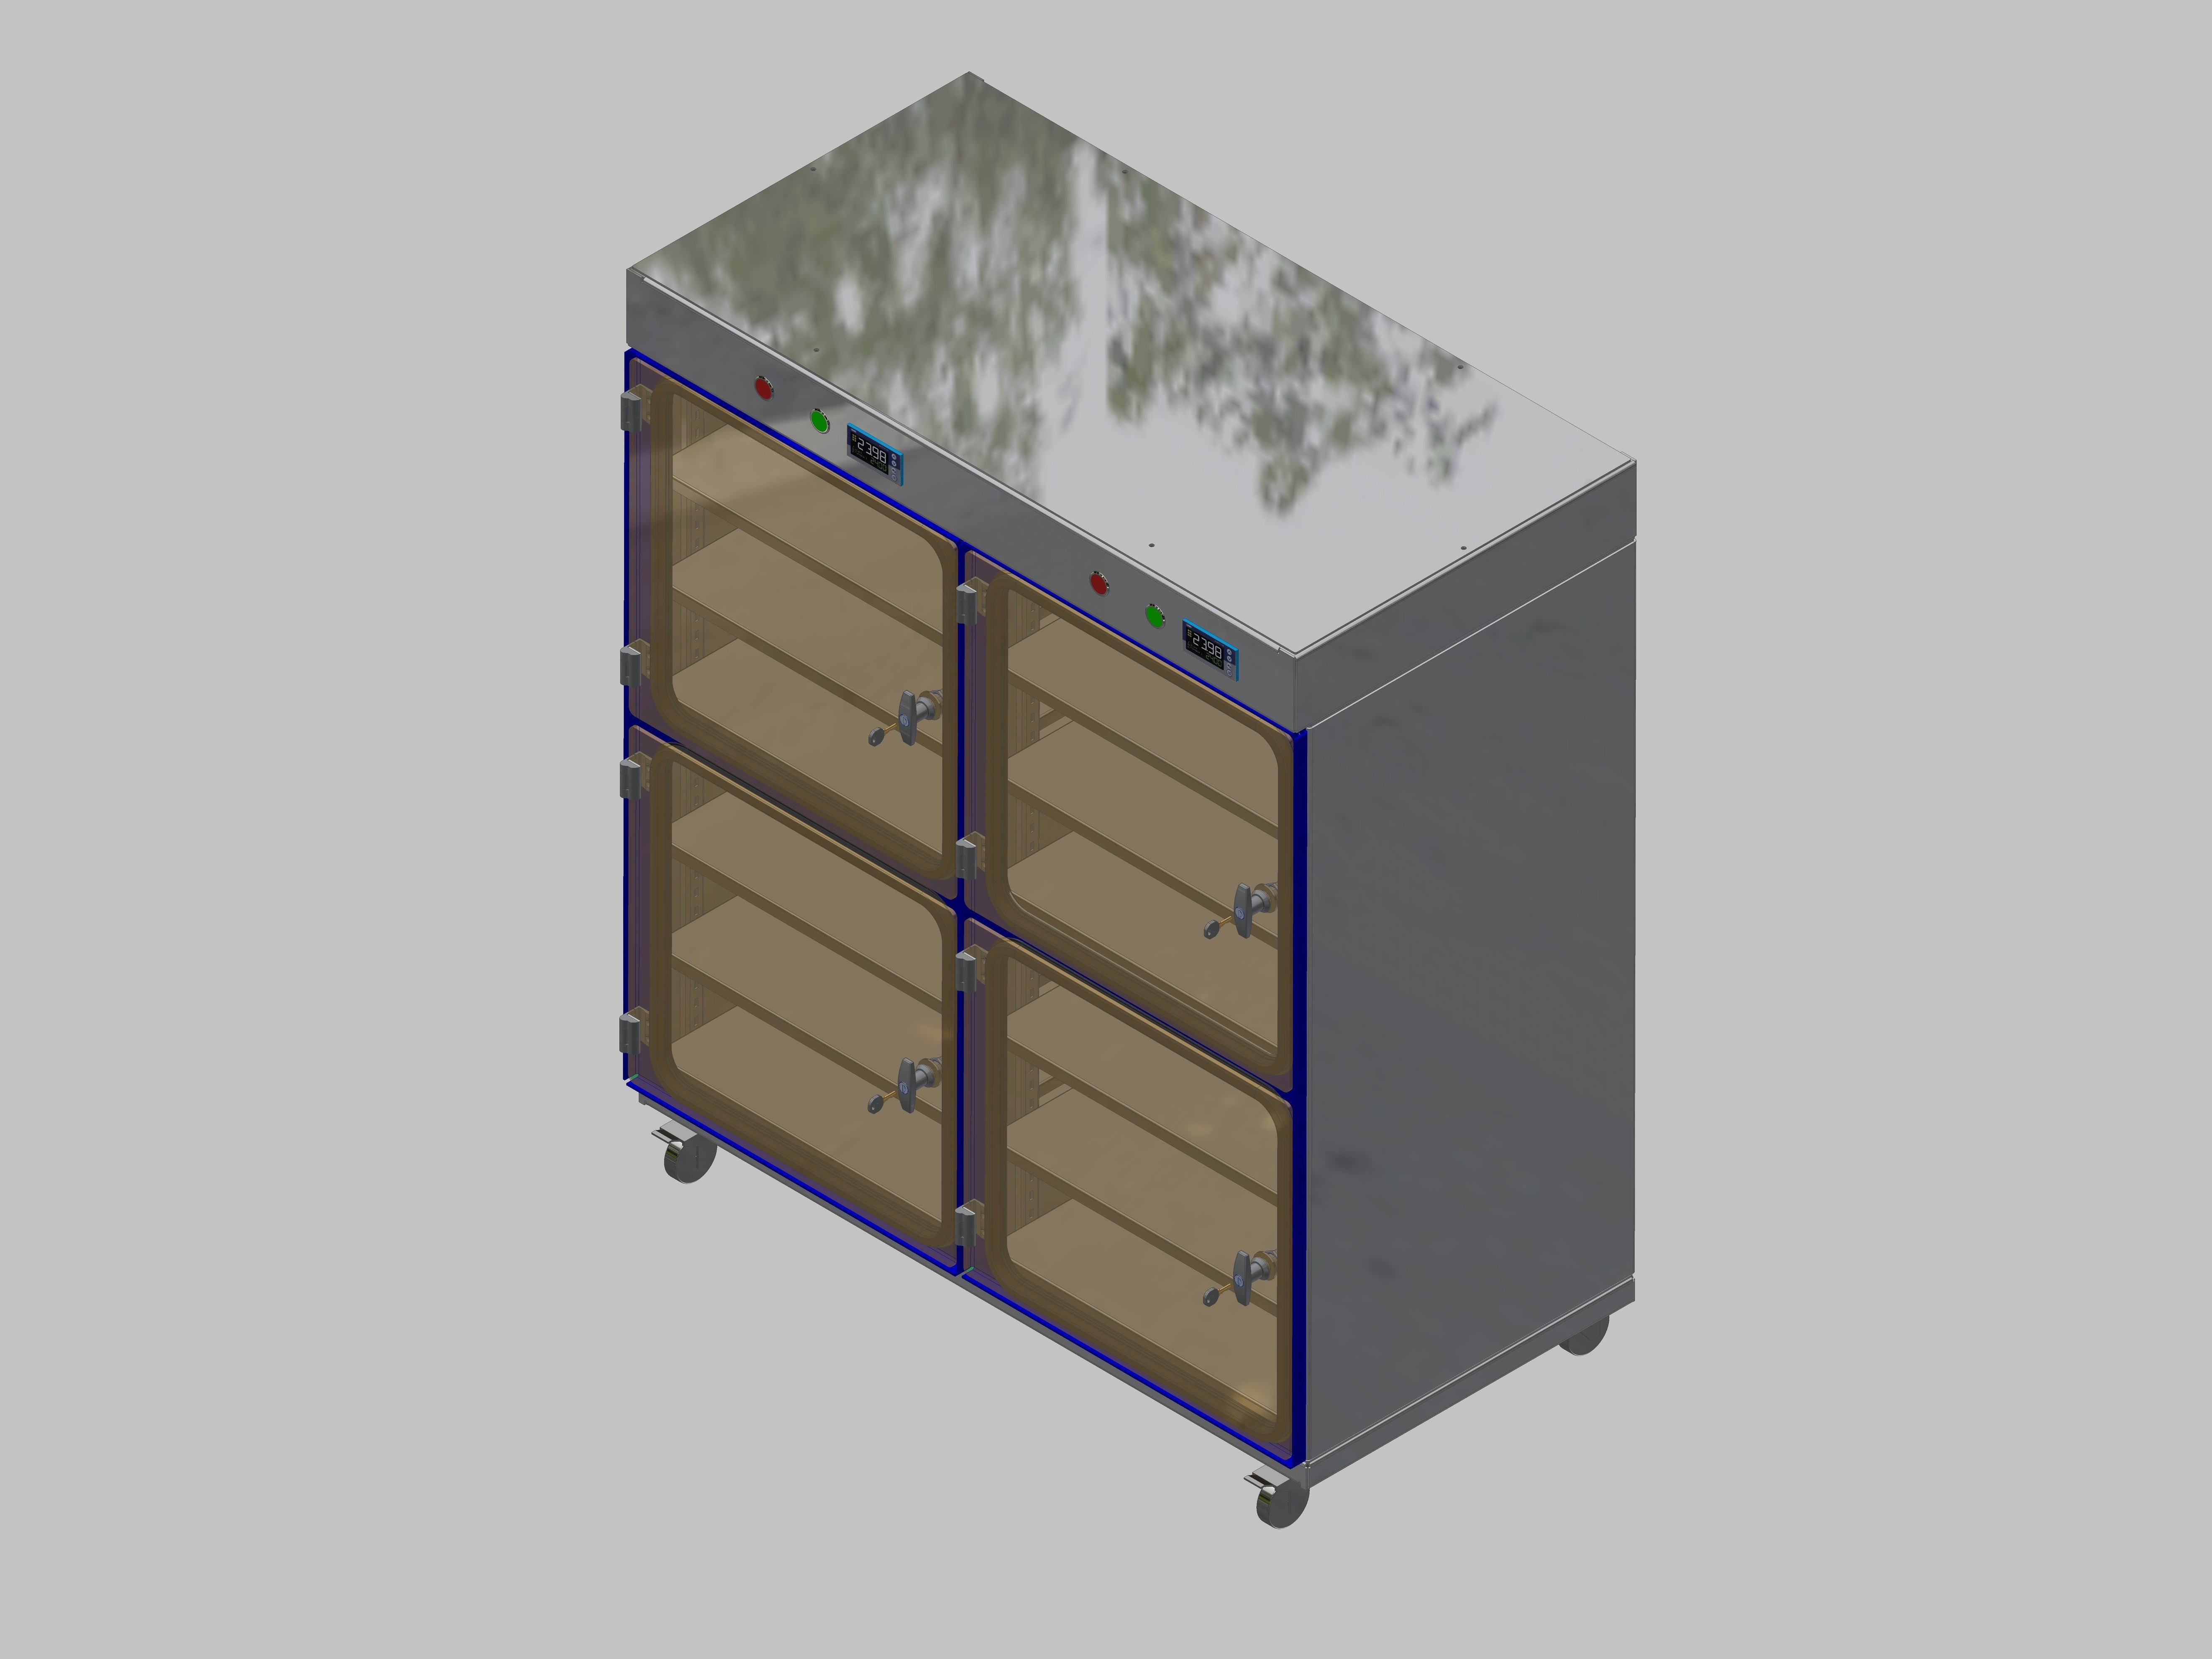 Dry storage cabinet-ITN-1200-4 with 3 shelves per compartment and base design with wheels